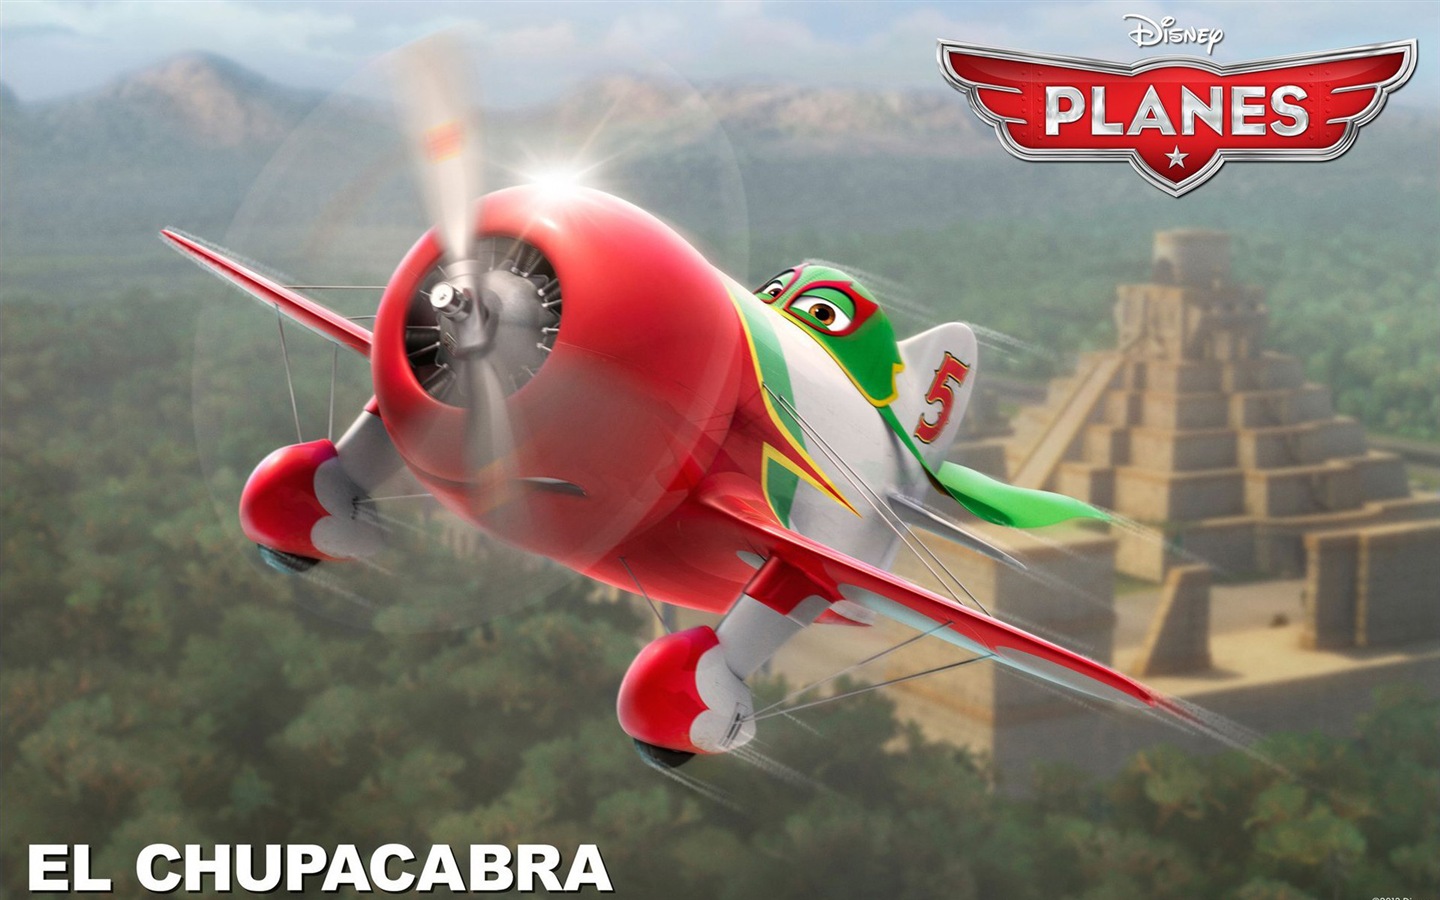 Planes 2013 HD wallpapers #17 - 1440x900